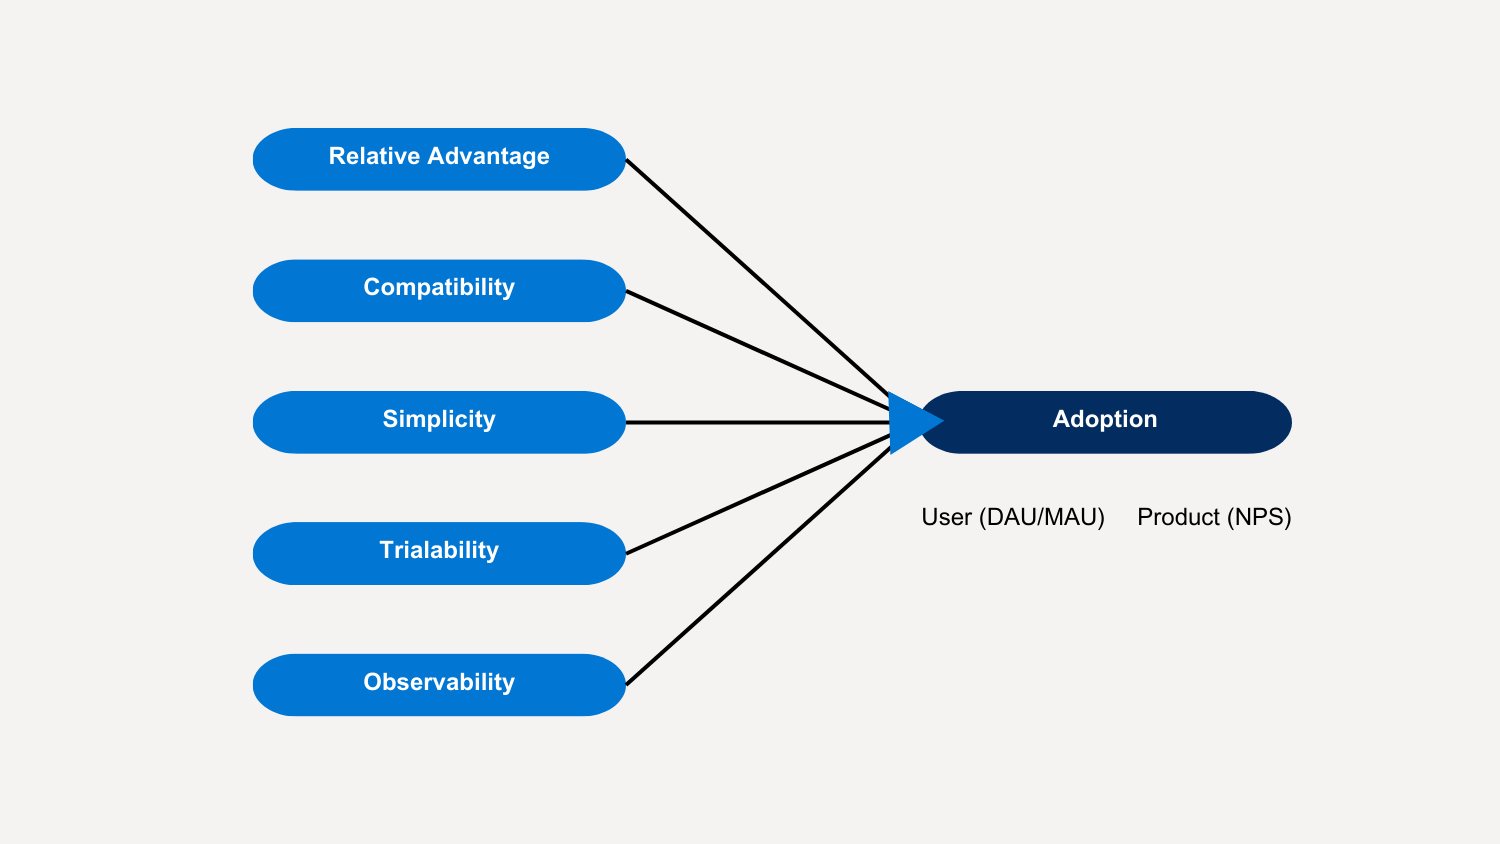 Graphic showing the adoption factors  - relative advantage, compatibility, simplicity, trialability, observability - in ovals with lines pointing to the word "adoption" in another oval. 